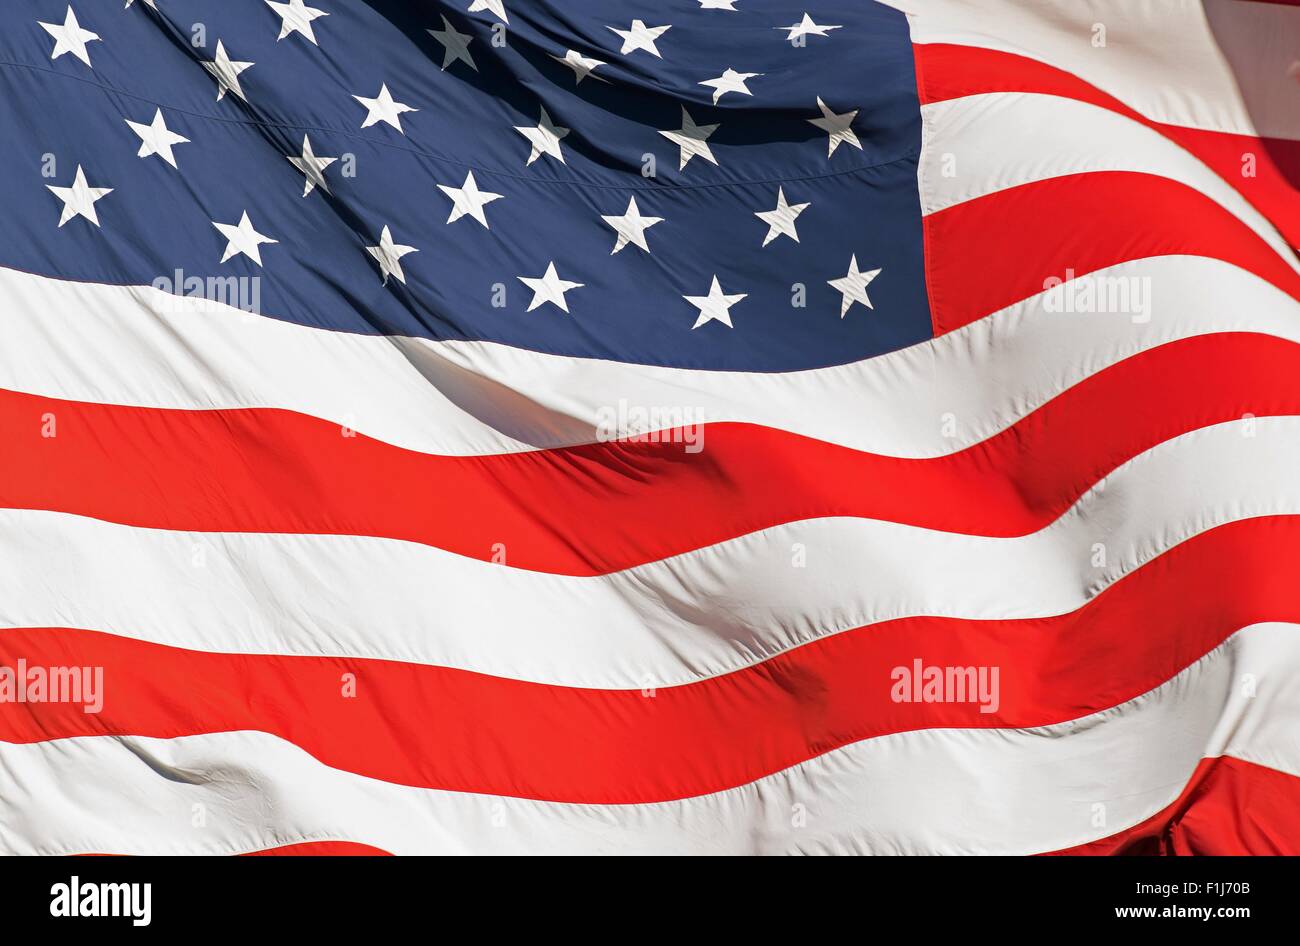 Waving Real Textile American Flag Closeup Photography. United States of America Nation Flag. Stock Photo